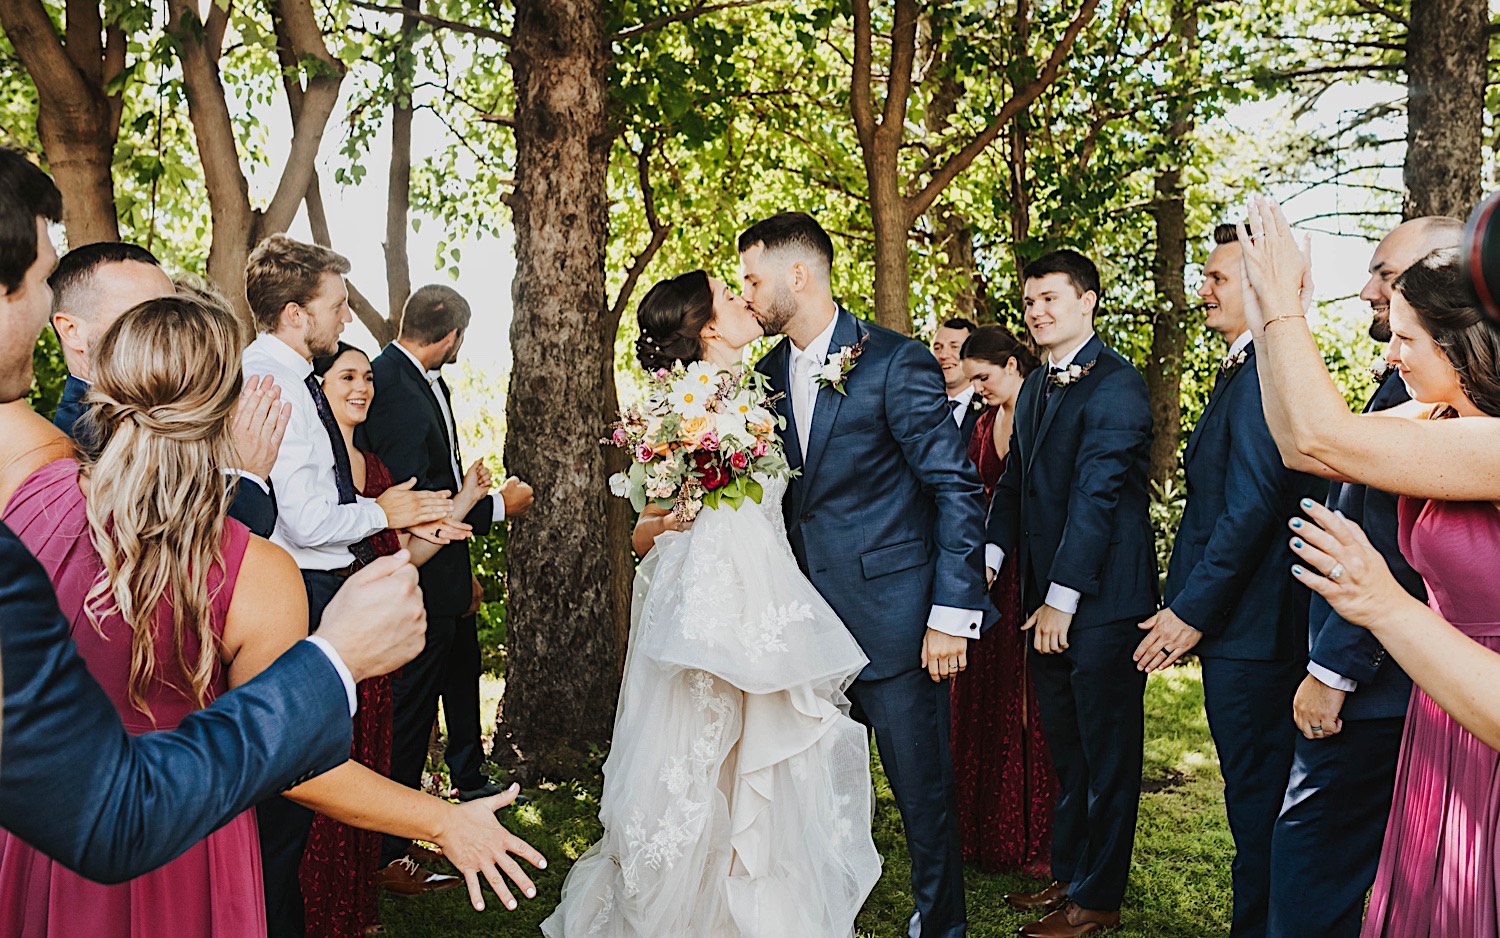 A bride and groom kiss while members of their wedding party surround them and cheer in front of a row of trees at the wedding venue Legacy Hill Farm